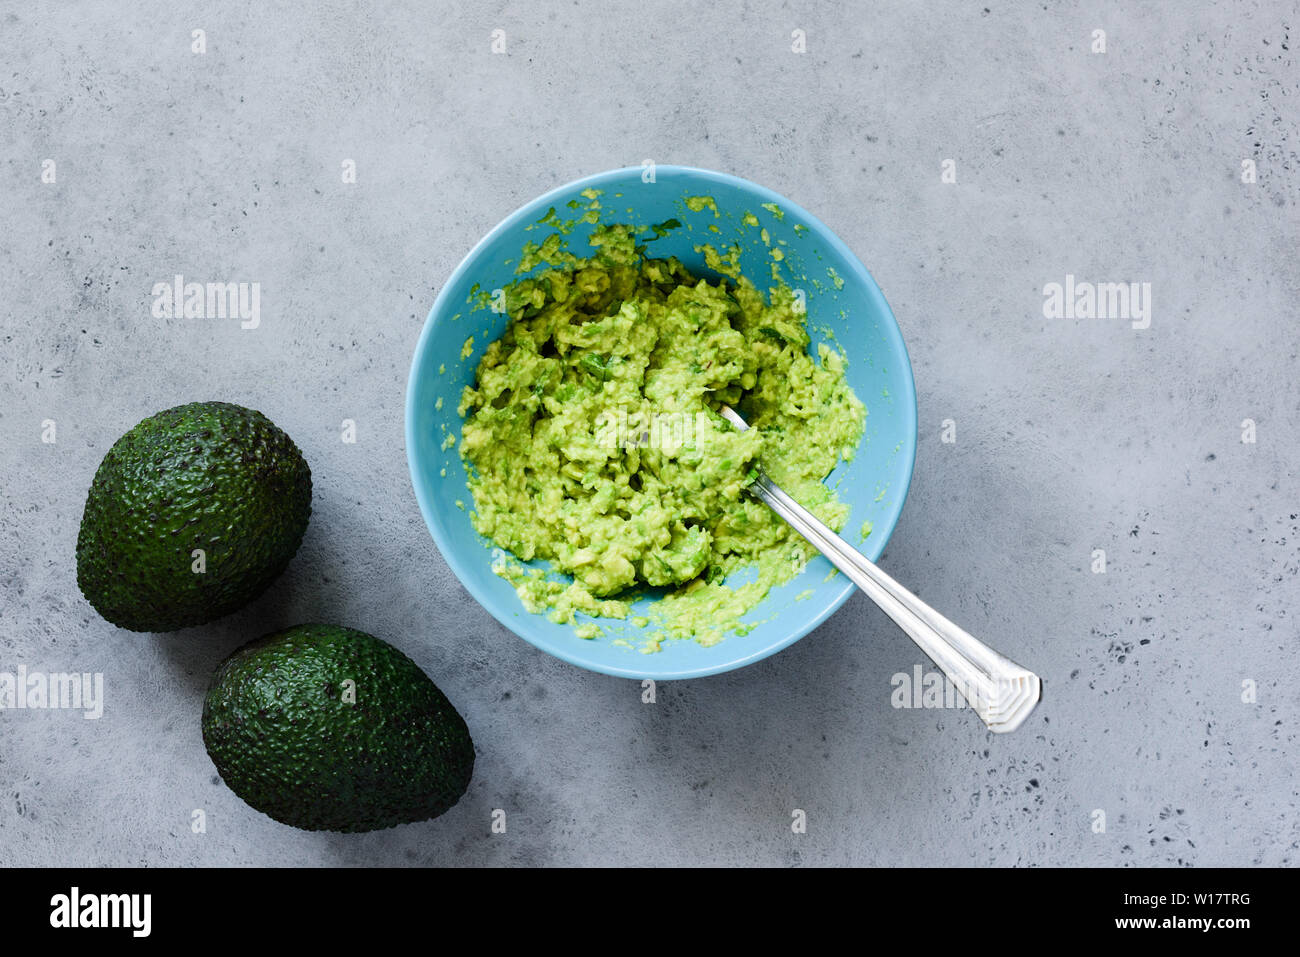 Mashed avocado in bowl on grey concrete background. Table top view. Cooking healthy vegan or vegetarian sauce or dip Stock Photo